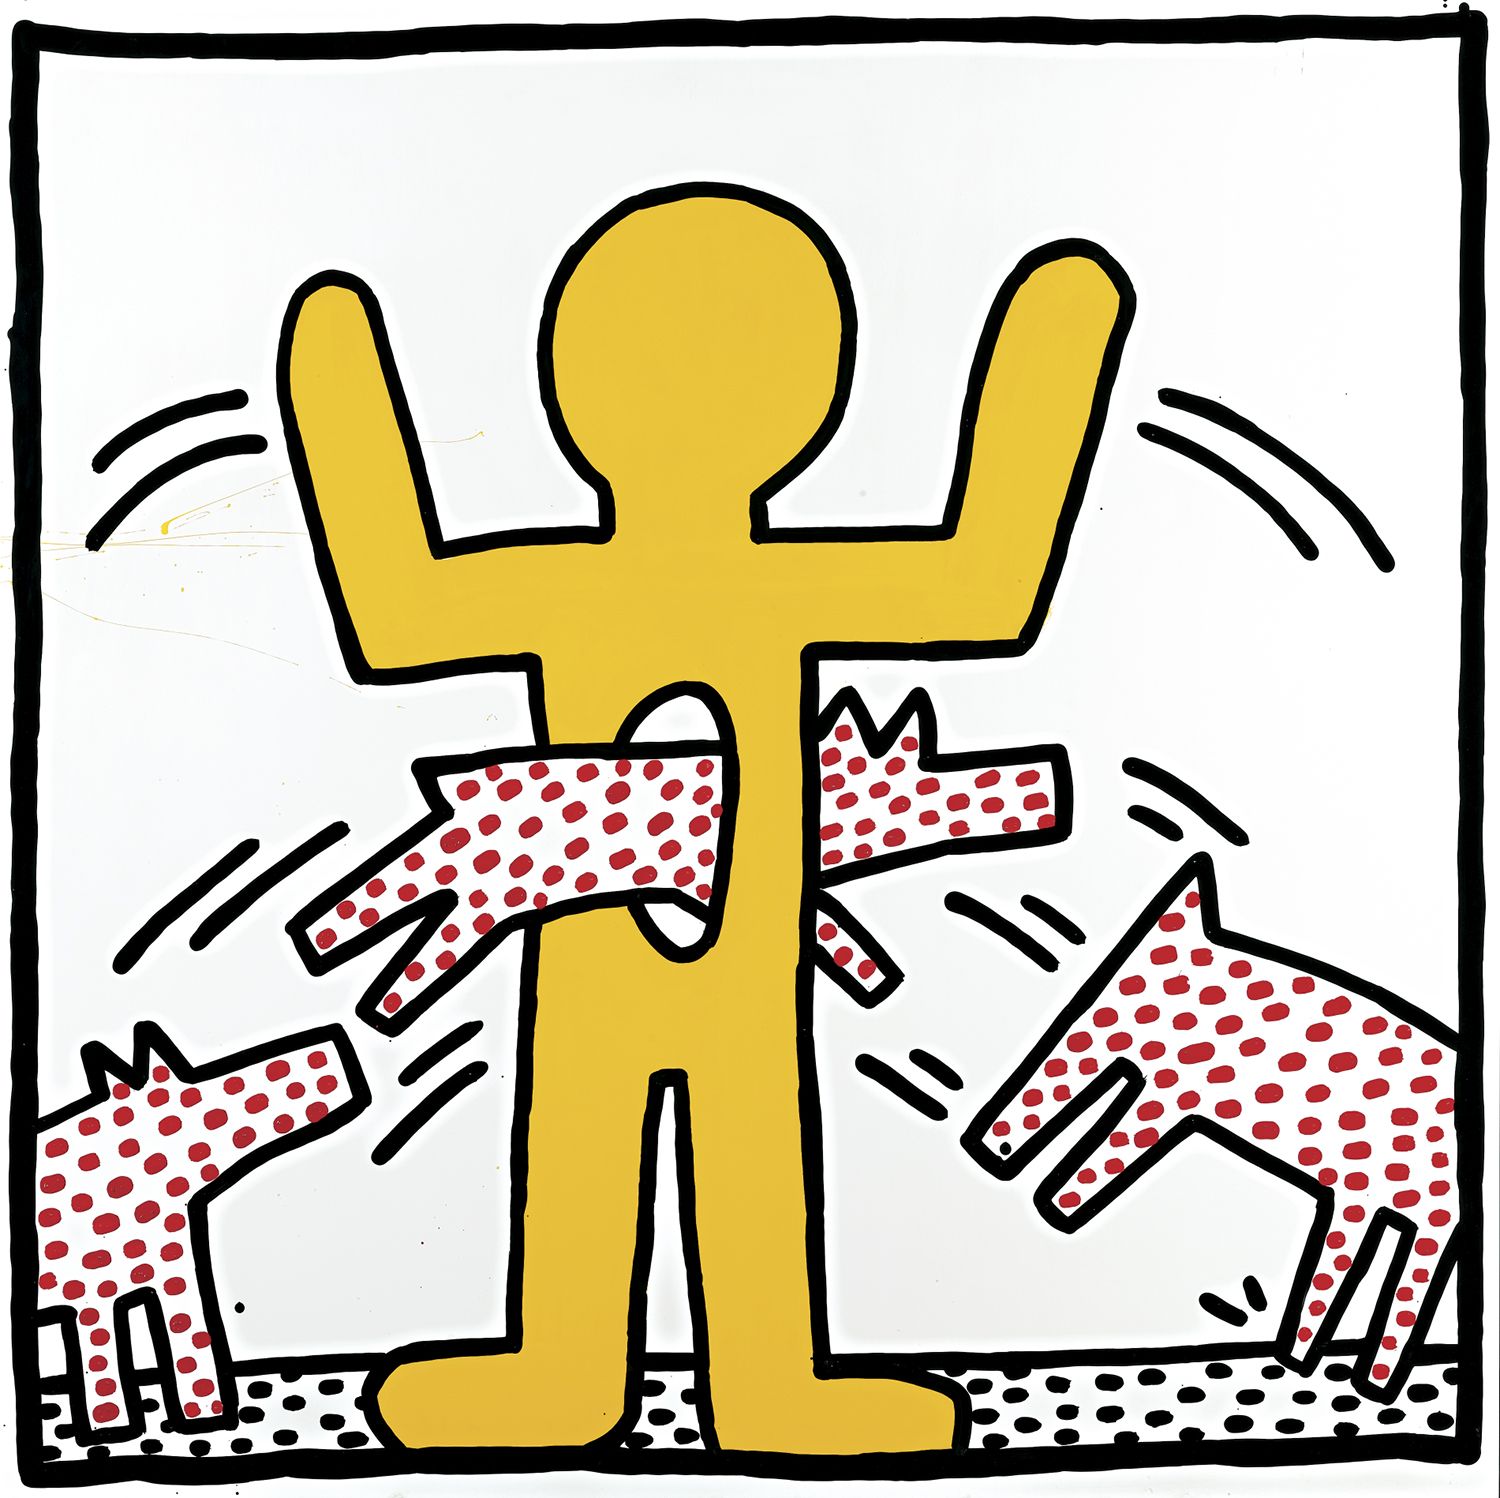 Keith Haring Untitled, 1982. Baked enamel on steel. Courtesy of Larry Warsh © The Keith Haring Foundation